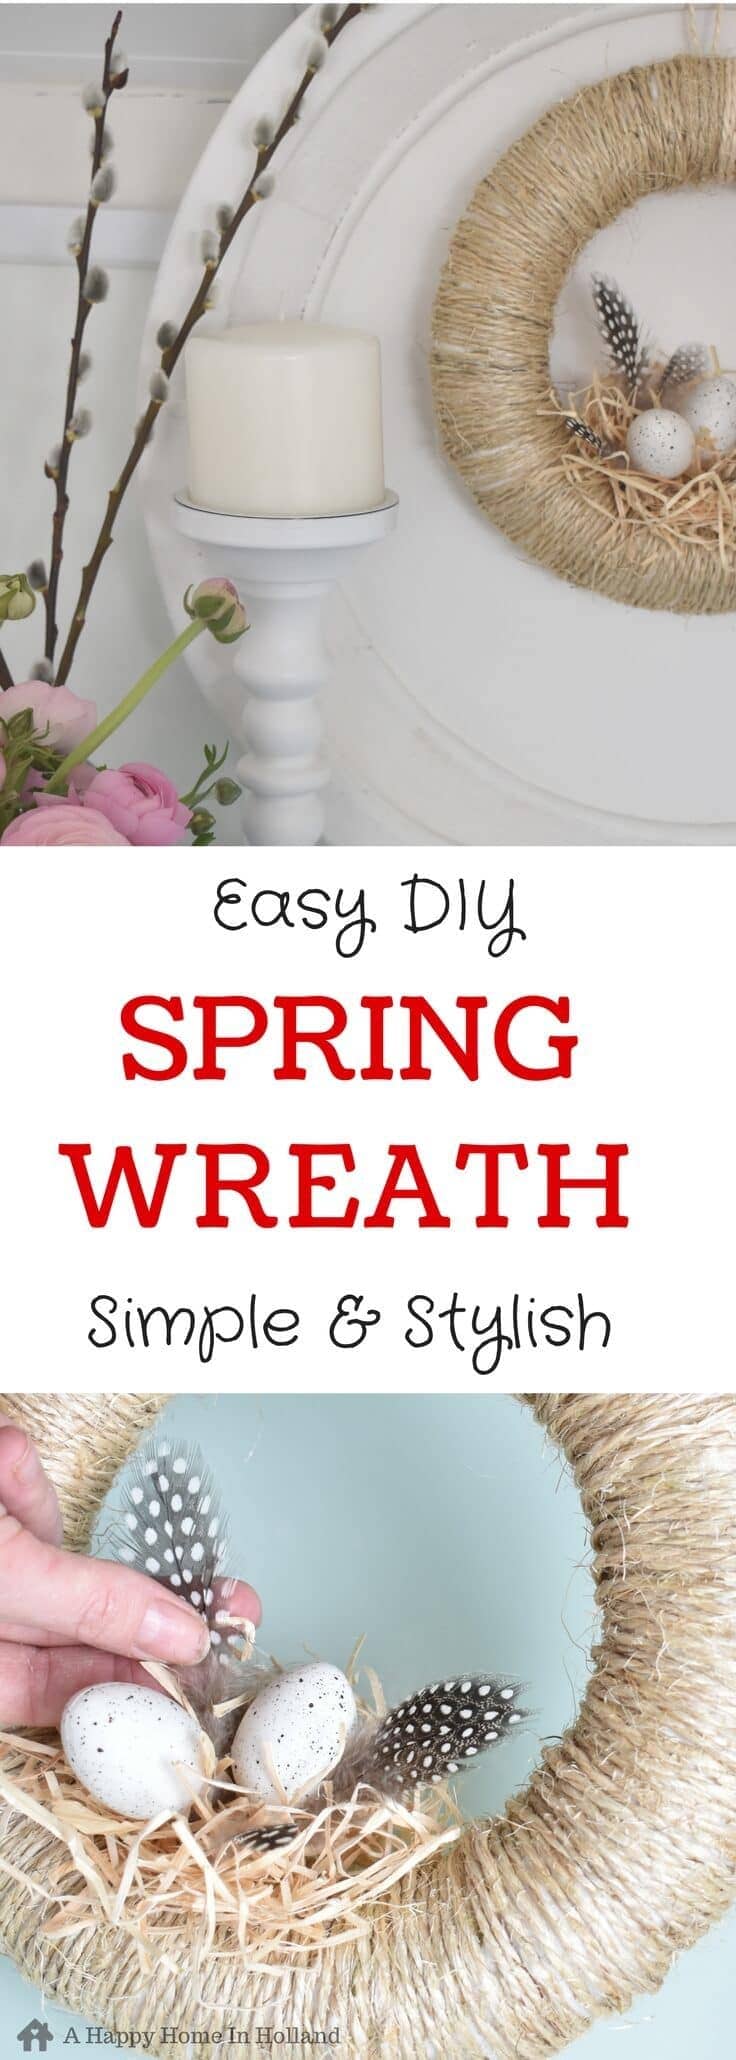 DIY Spring Wreath Idea - Learn how to make this simple and stylish bird's nest wreath in a few easy steps